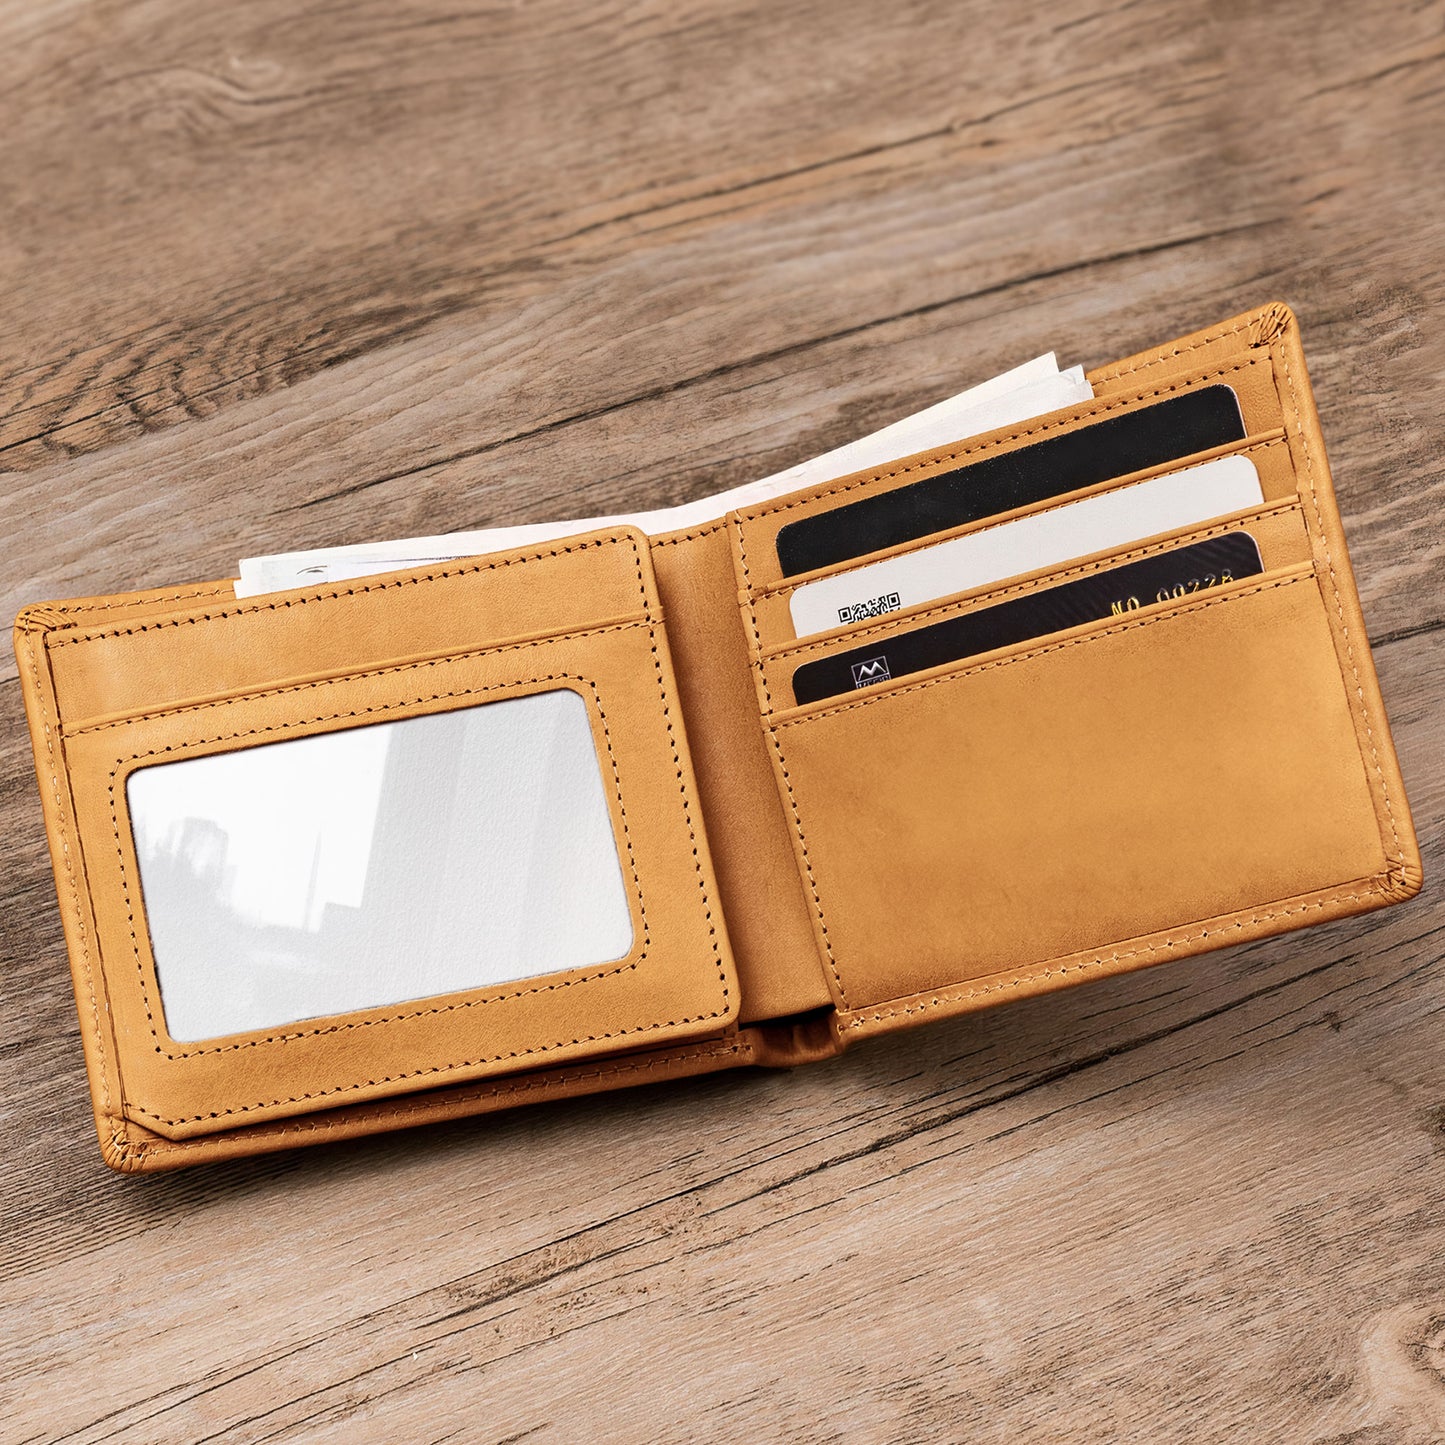 Daddy's Team - Personalized Leather Wallet